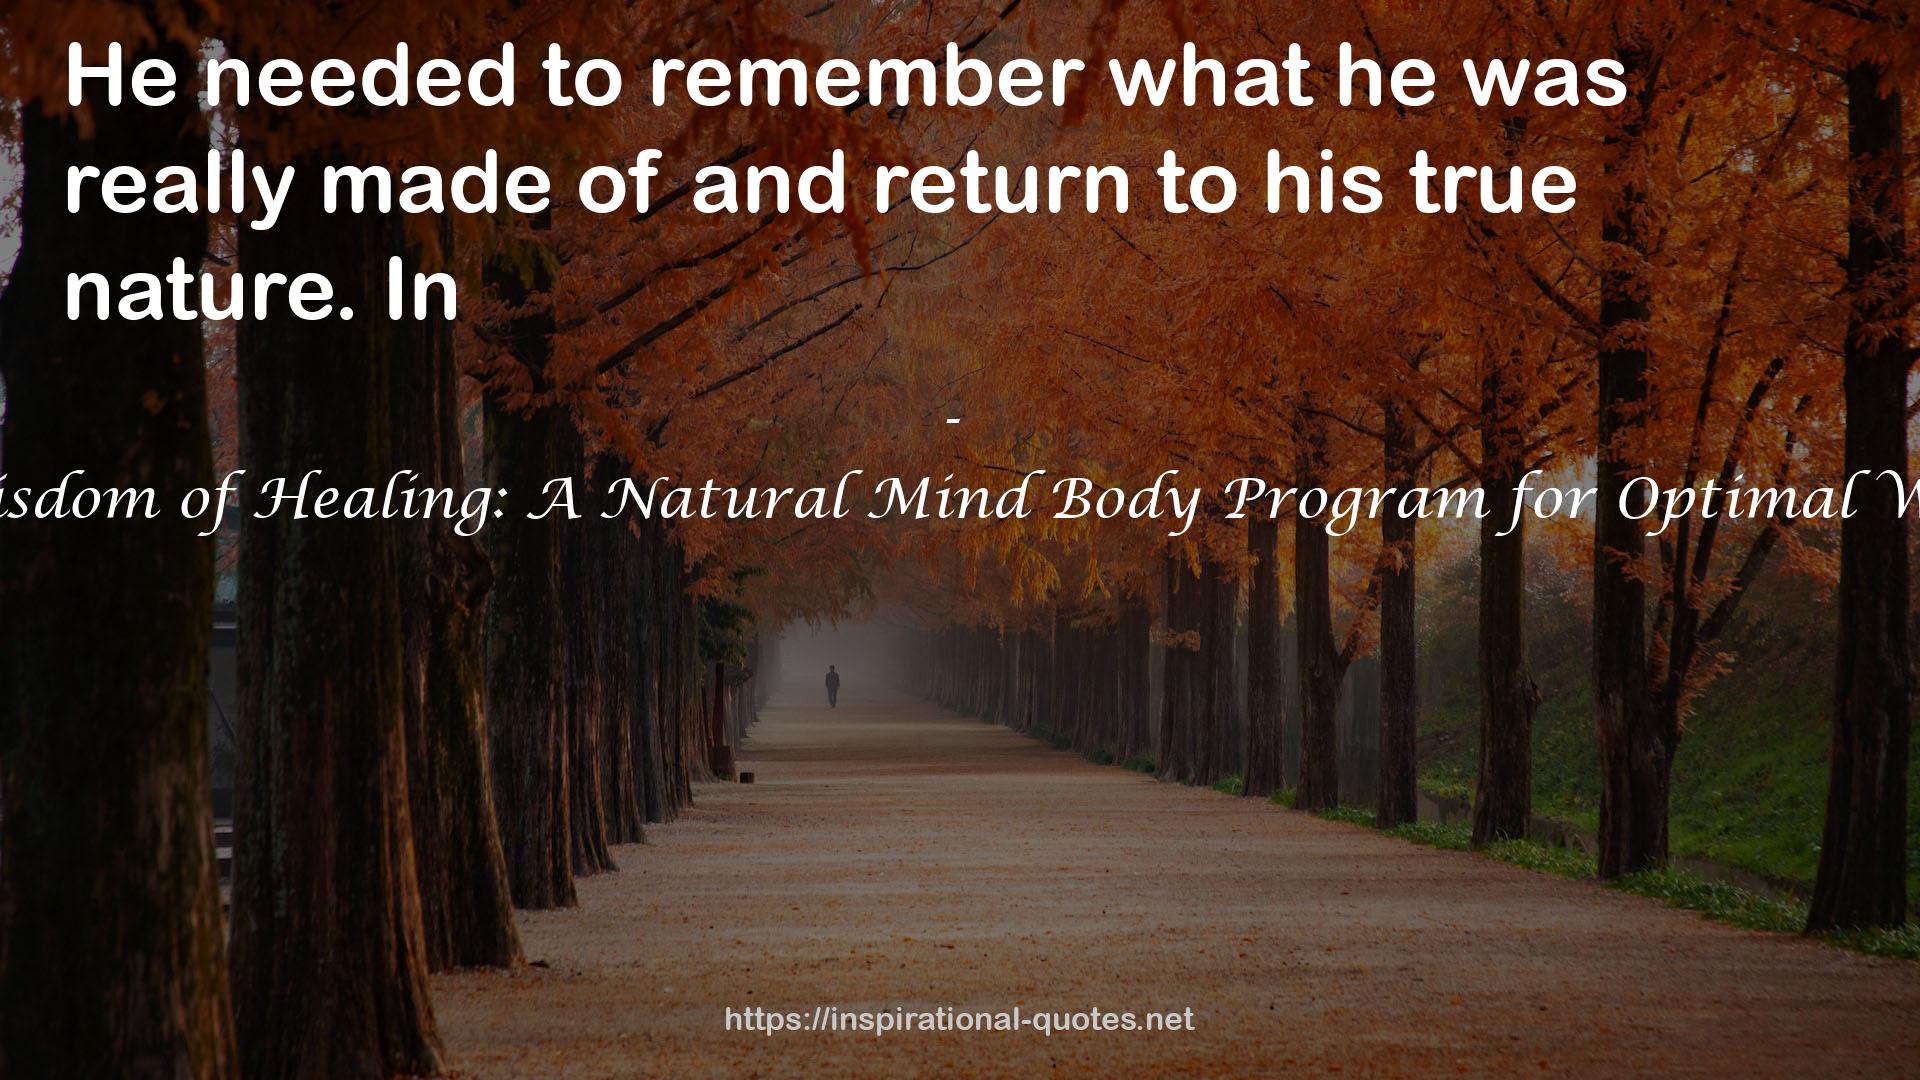 The Wisdom of Healing: A Natural Mind Body Program for Optimal Wellness QUOTES